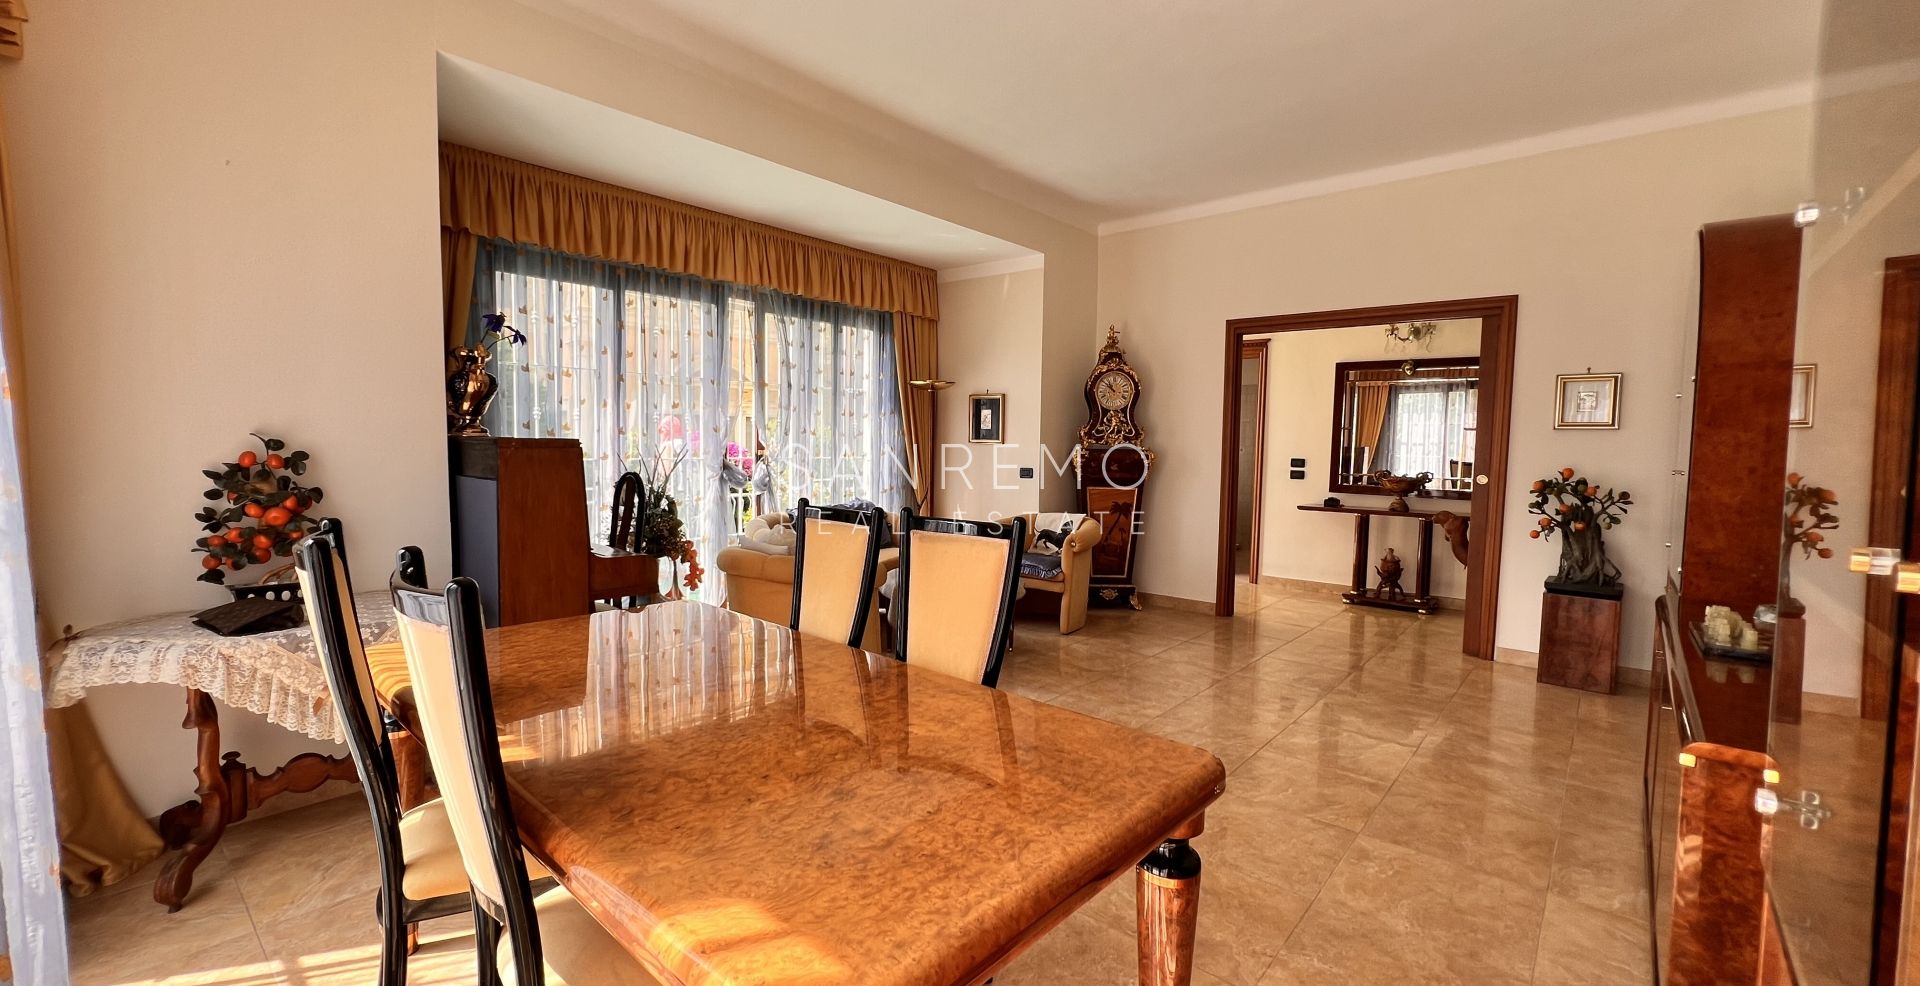 Lovely villa surrounded by greenery within walking distance of the Casino